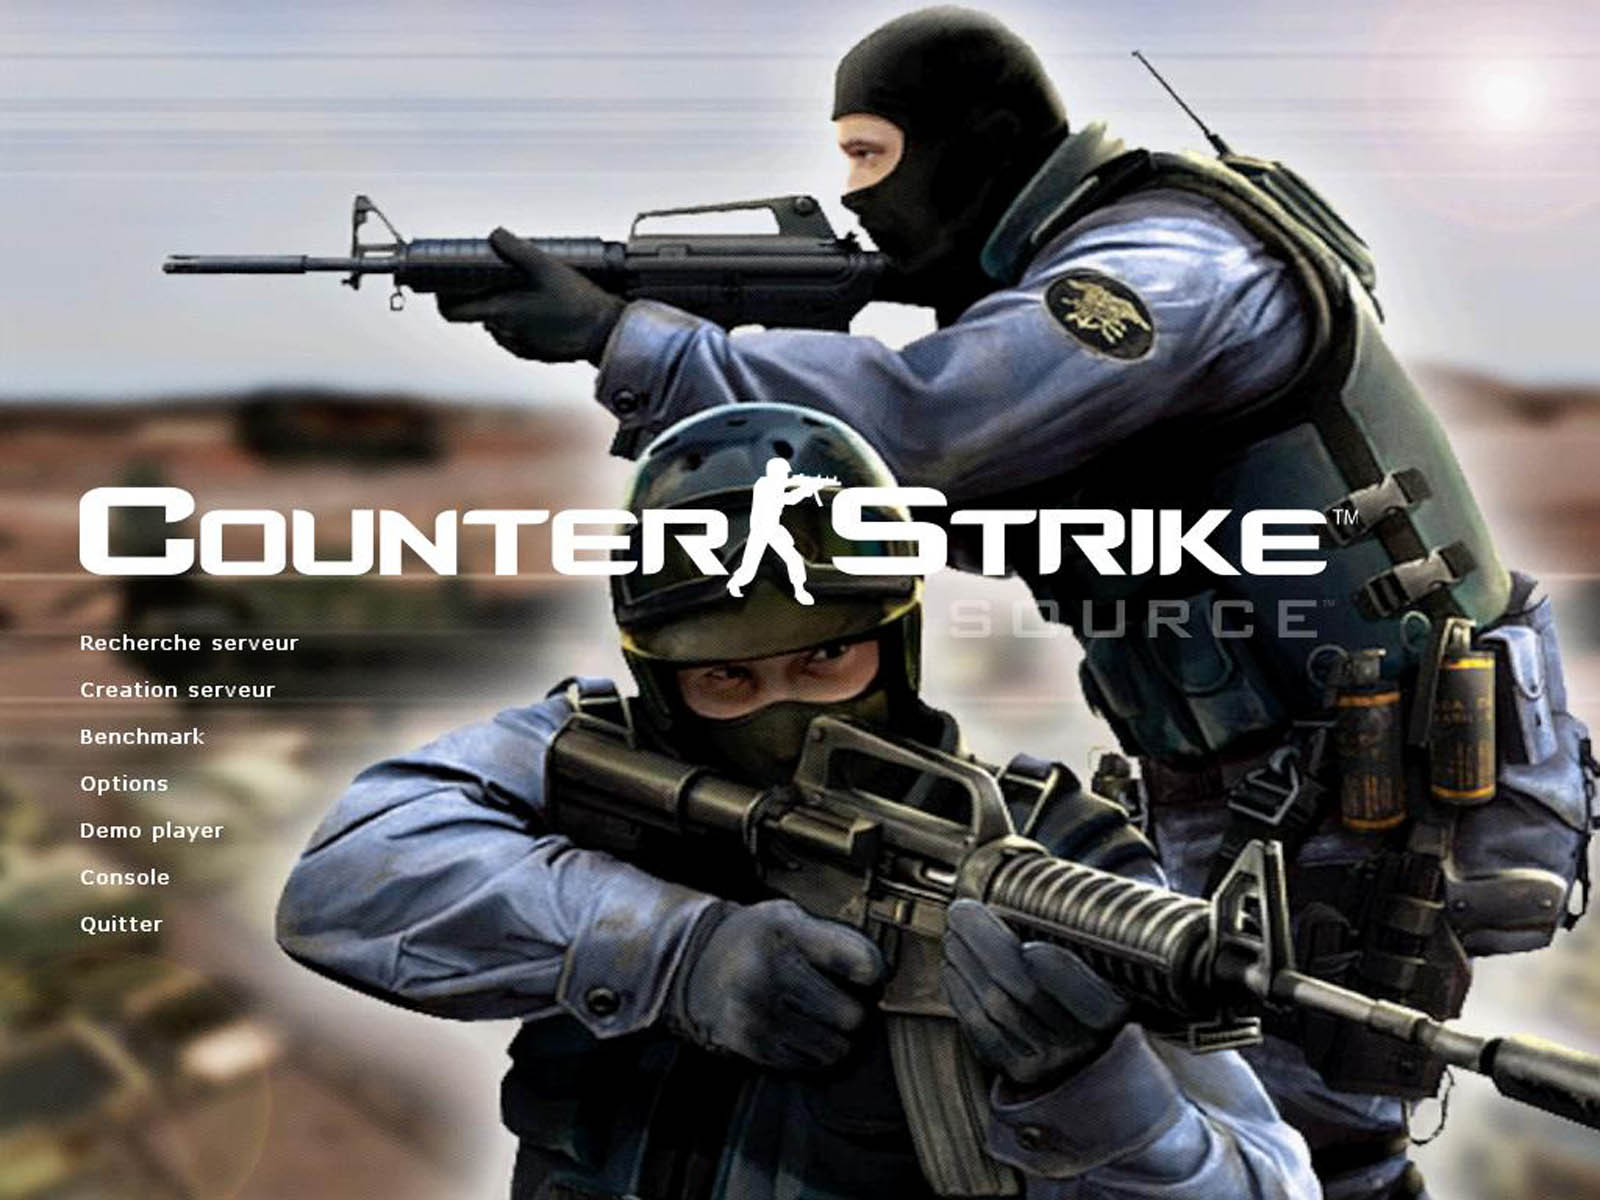 Counter Strike Source Game Wallpaper. My Note Book